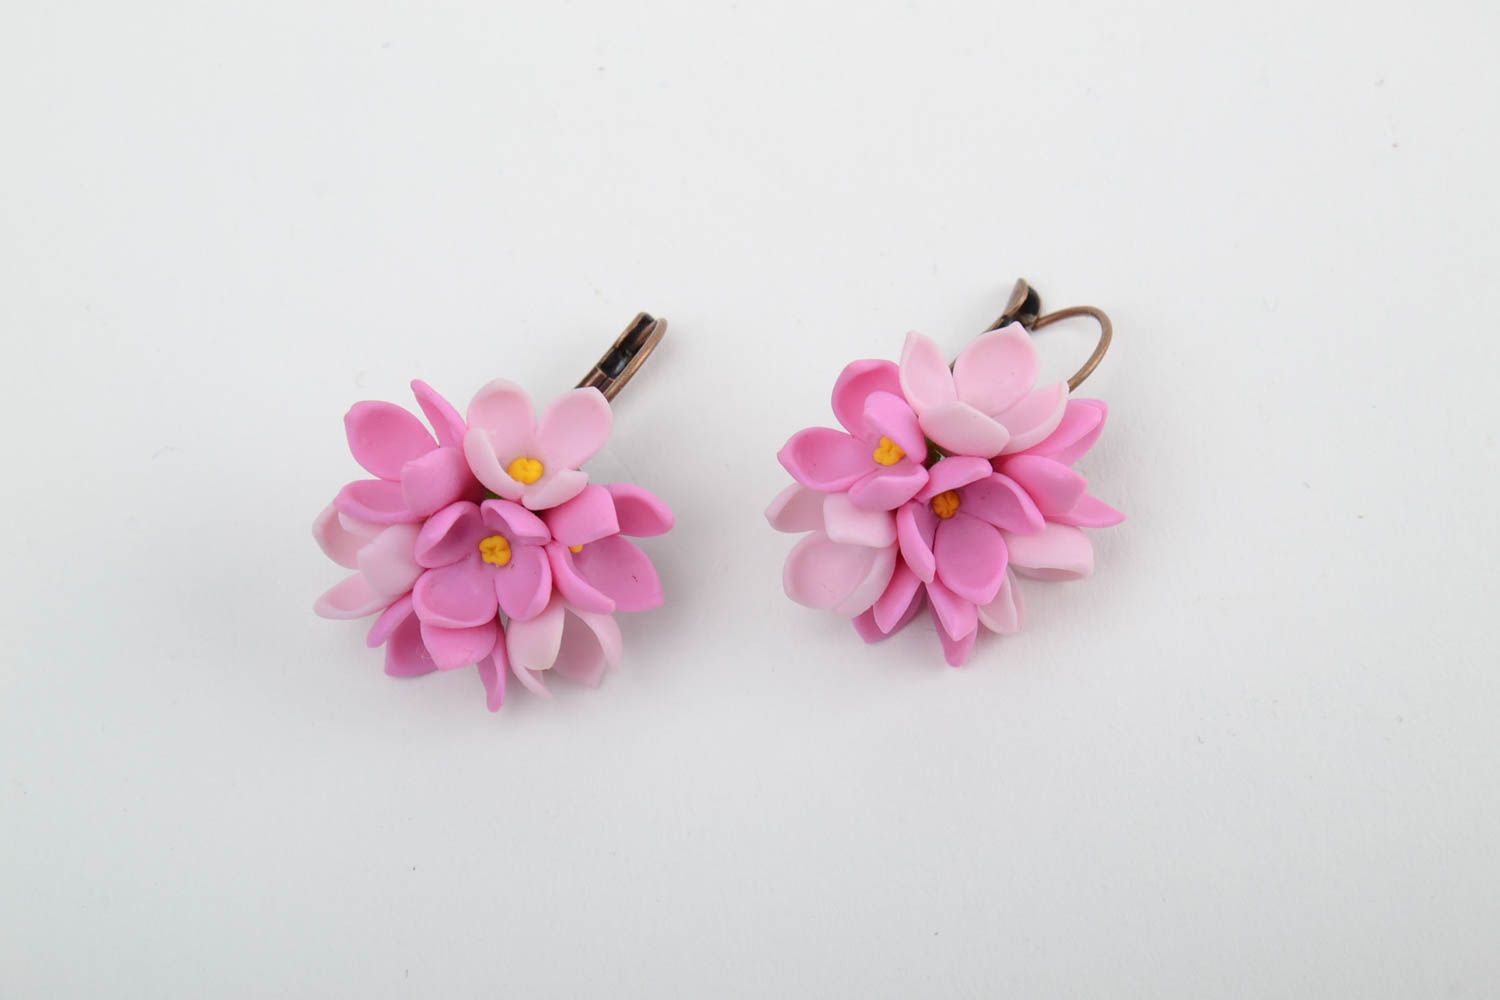 Handmade small festive earrings with tender pink cold porcelain lilac flowers photo 3